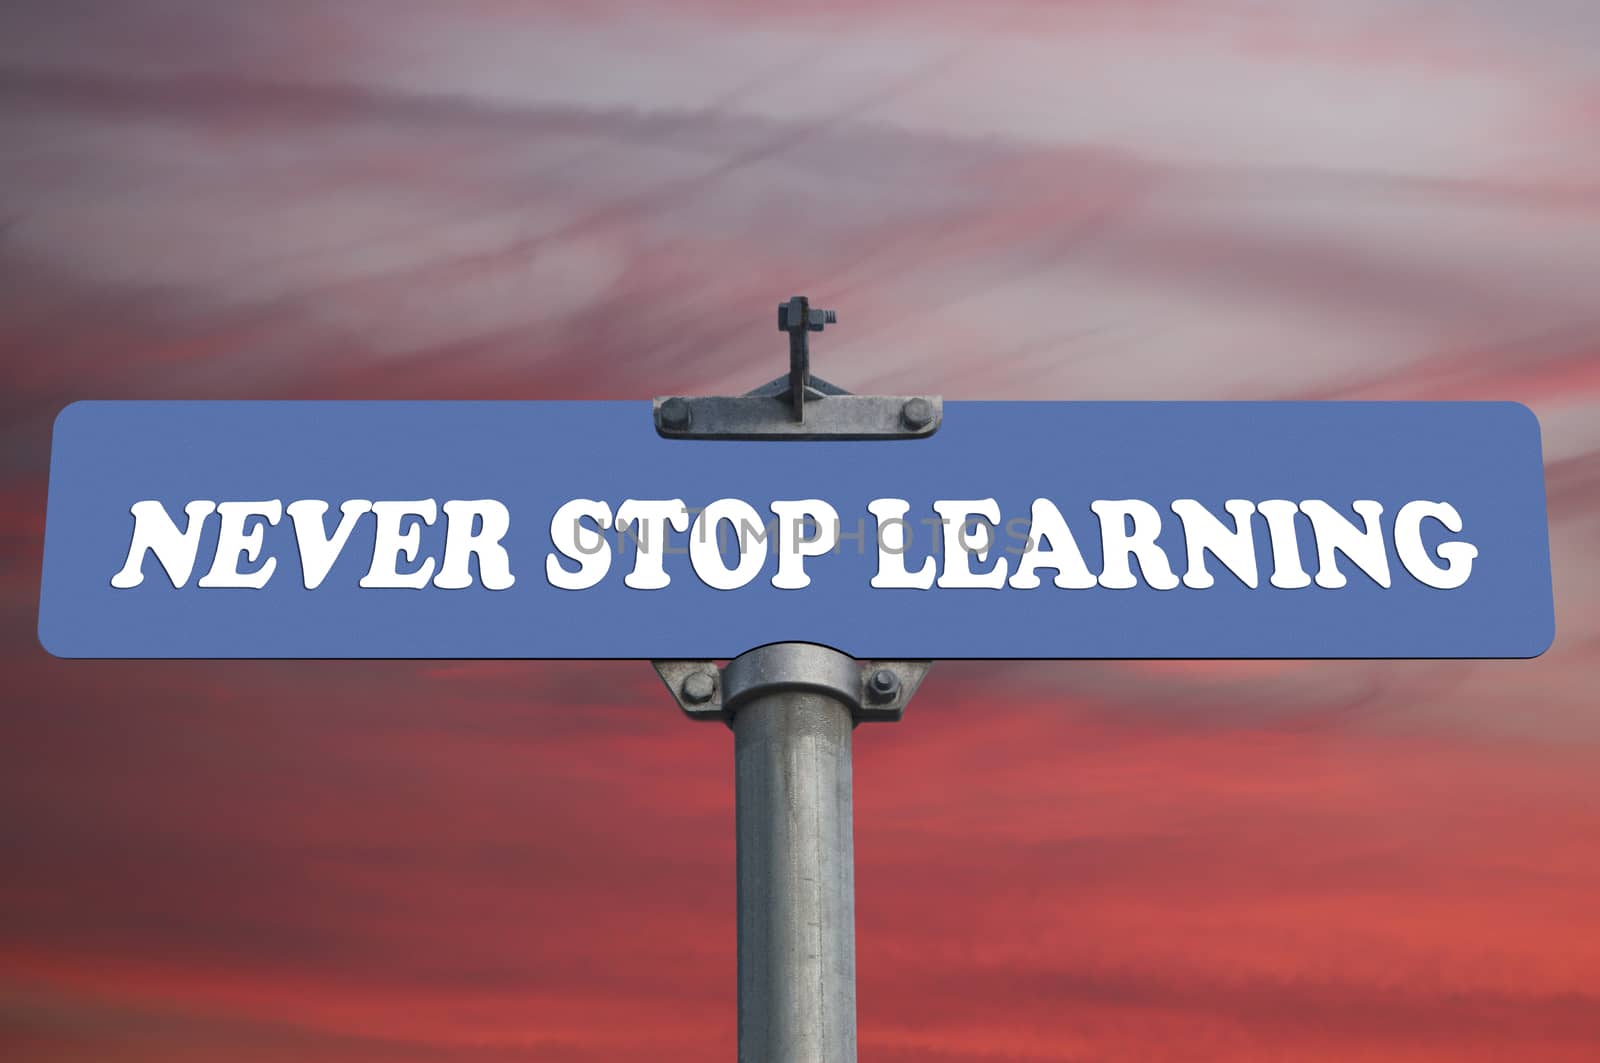 Never stop learning road sign by payphoto